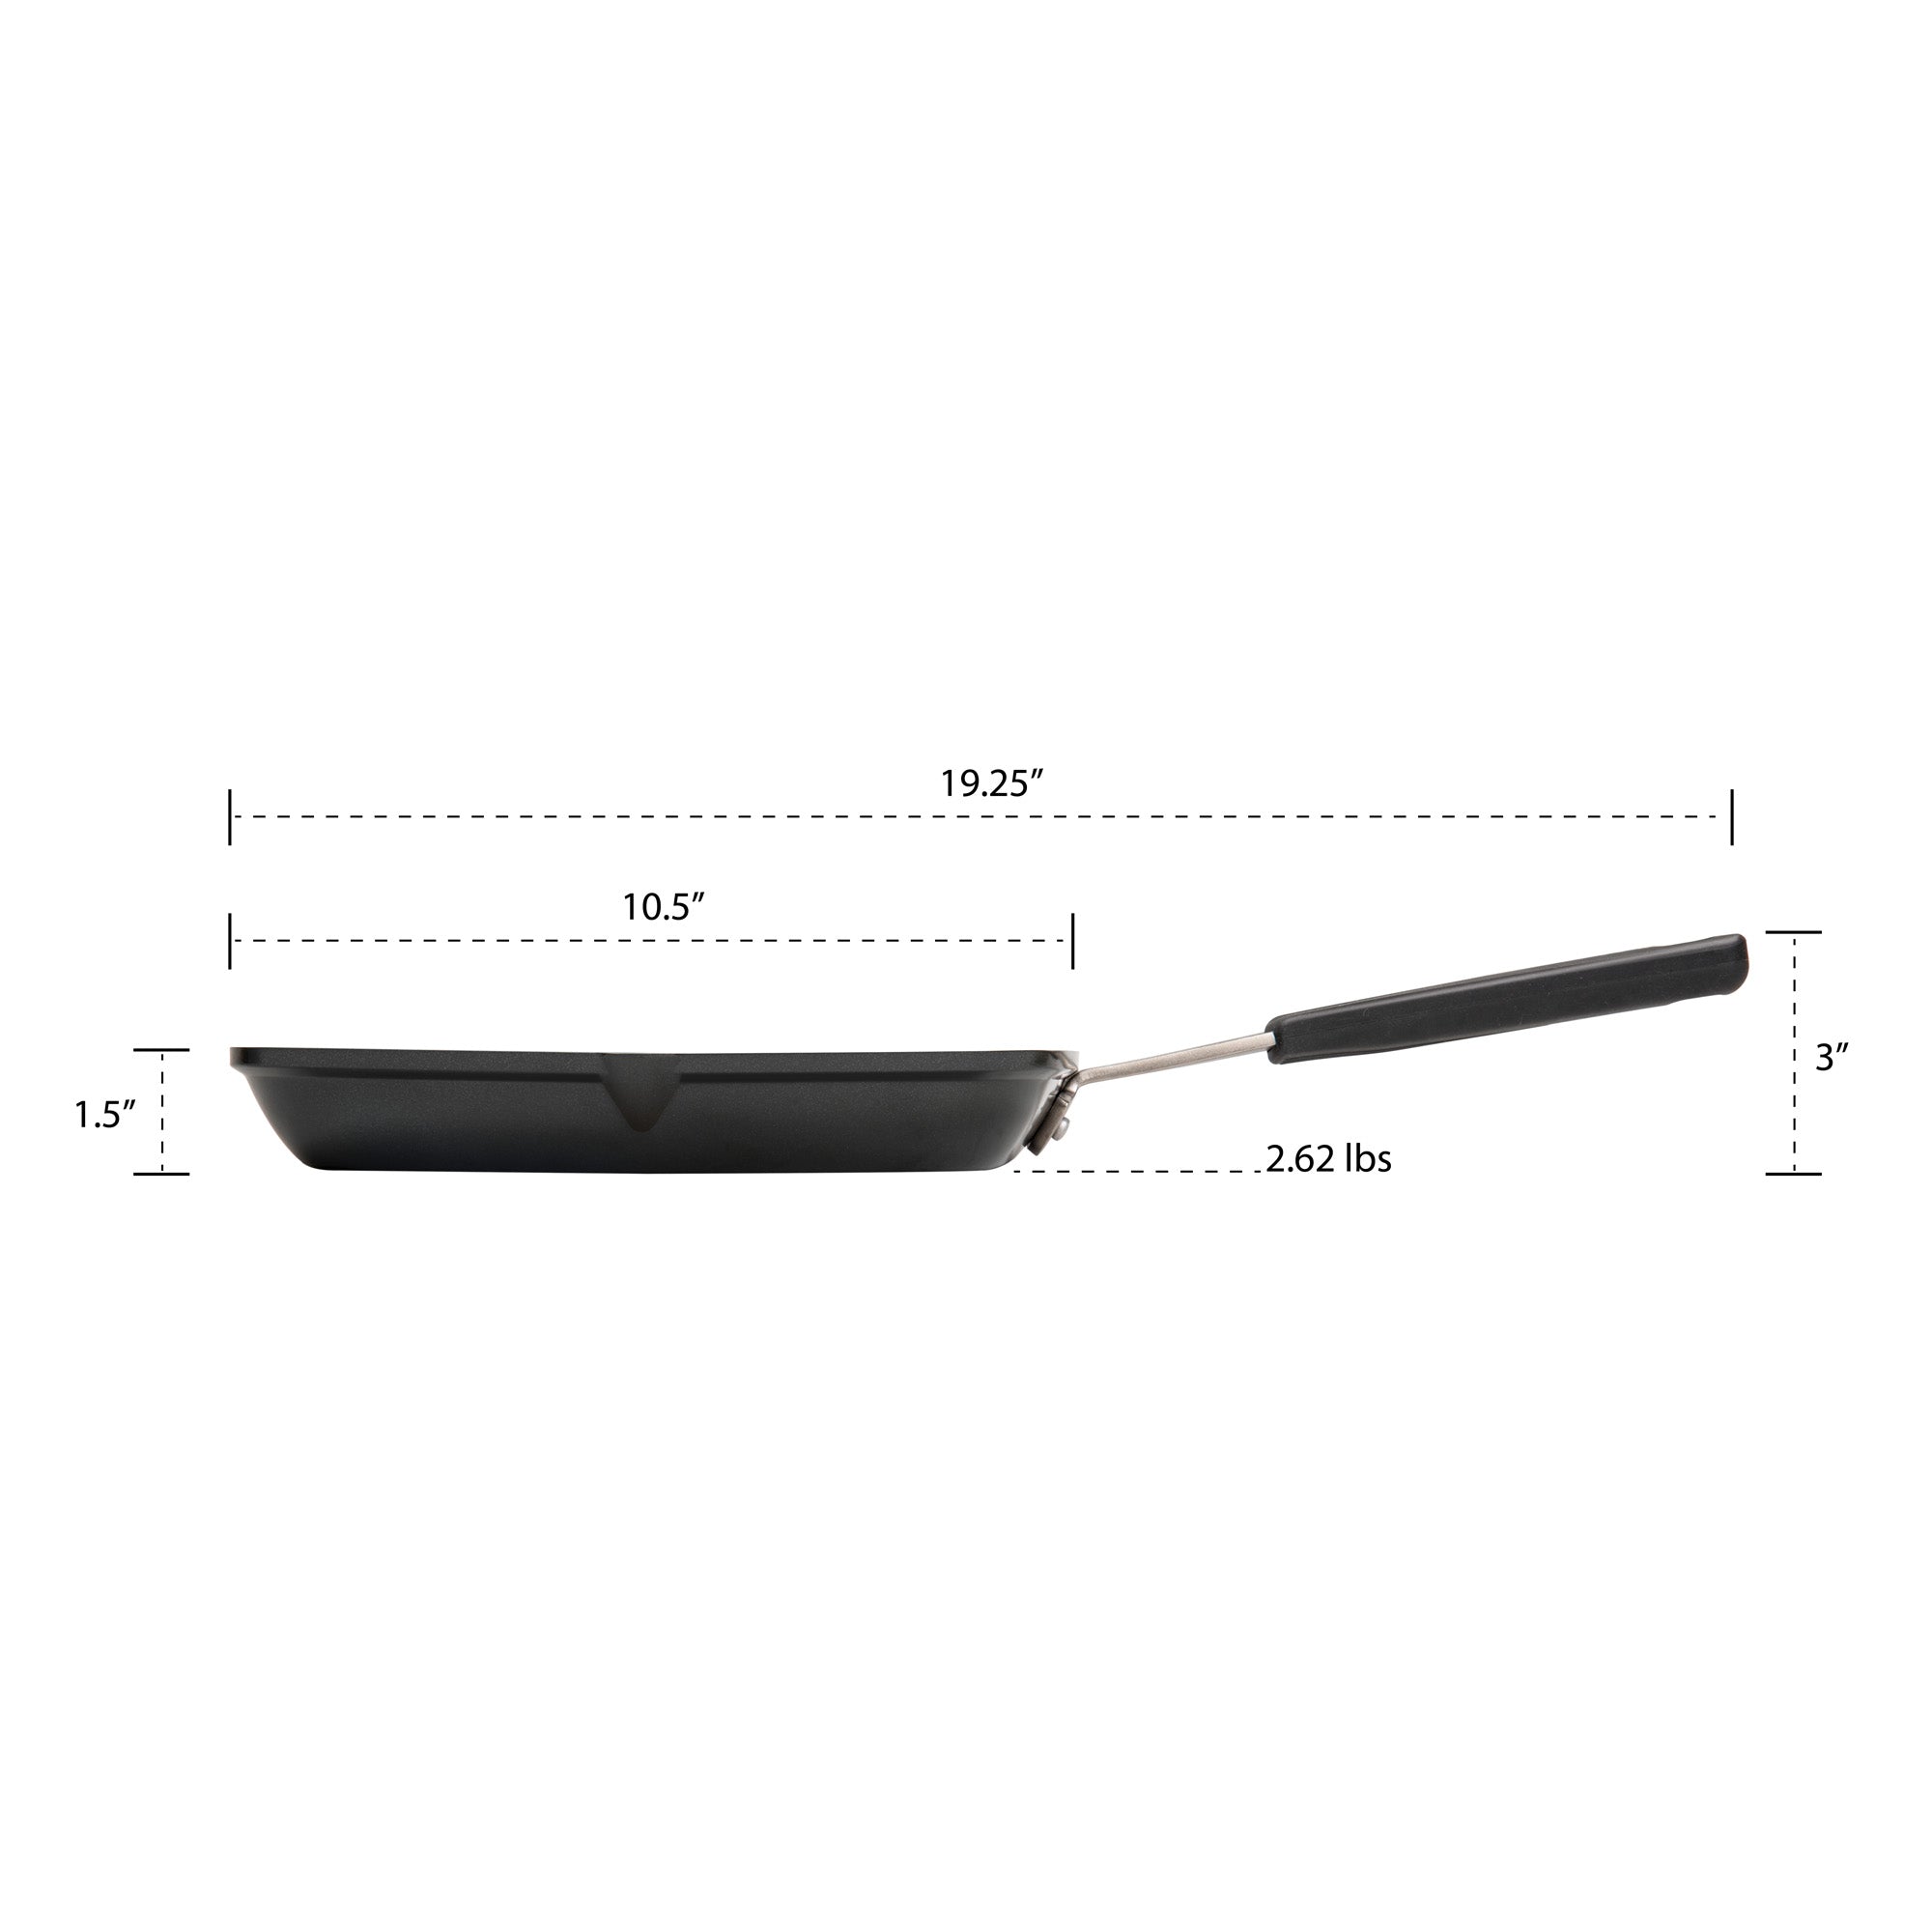 GRILL PAN, NON-STICK ALUMINIUM COOKWARE WITH STAINLESS STEEL CHEF’S HANDLE, 10” (25cm)